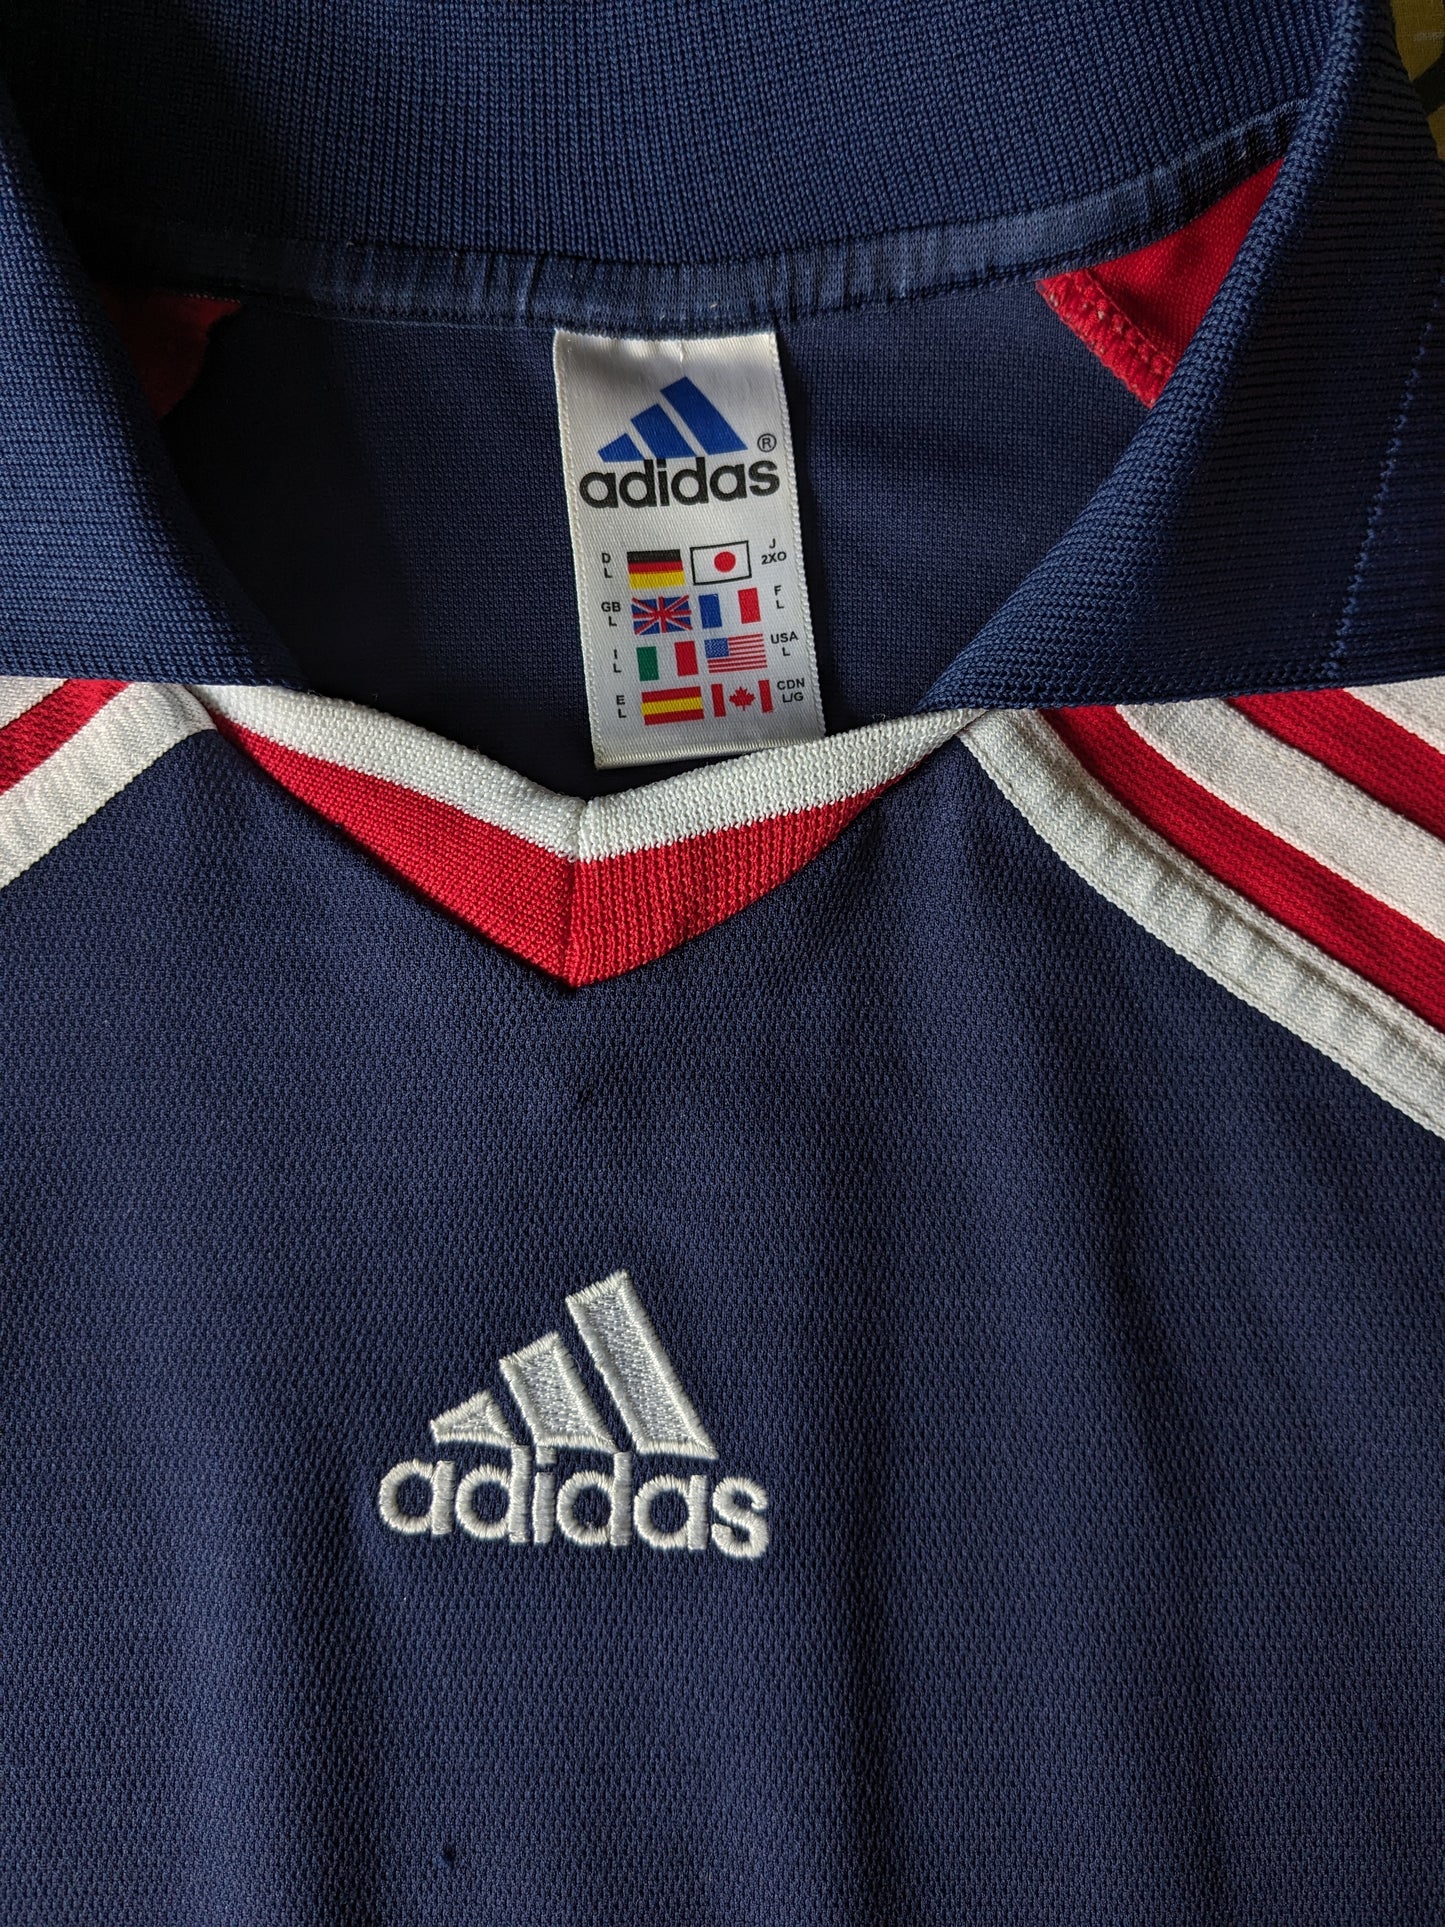 Vintage Adidas Sport Polo. Red blue white colored. Size XL.